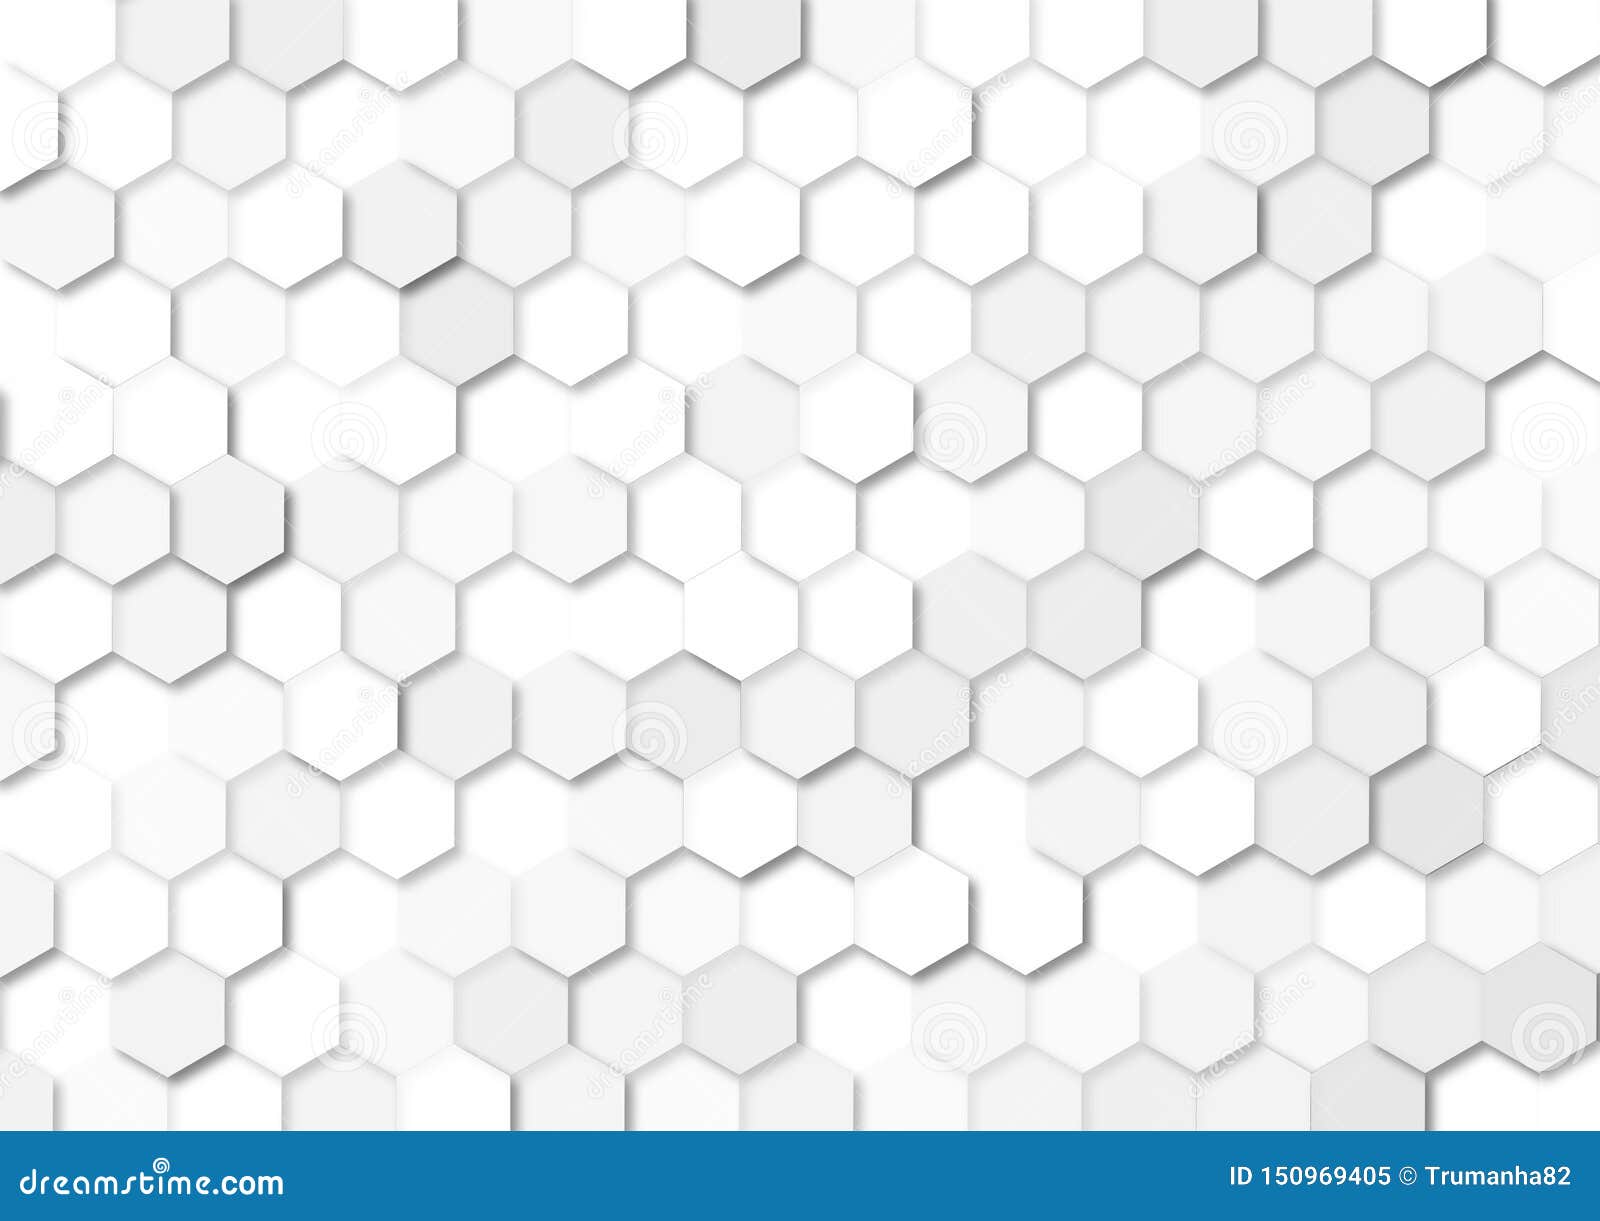  grey hexagons texture for abstract background